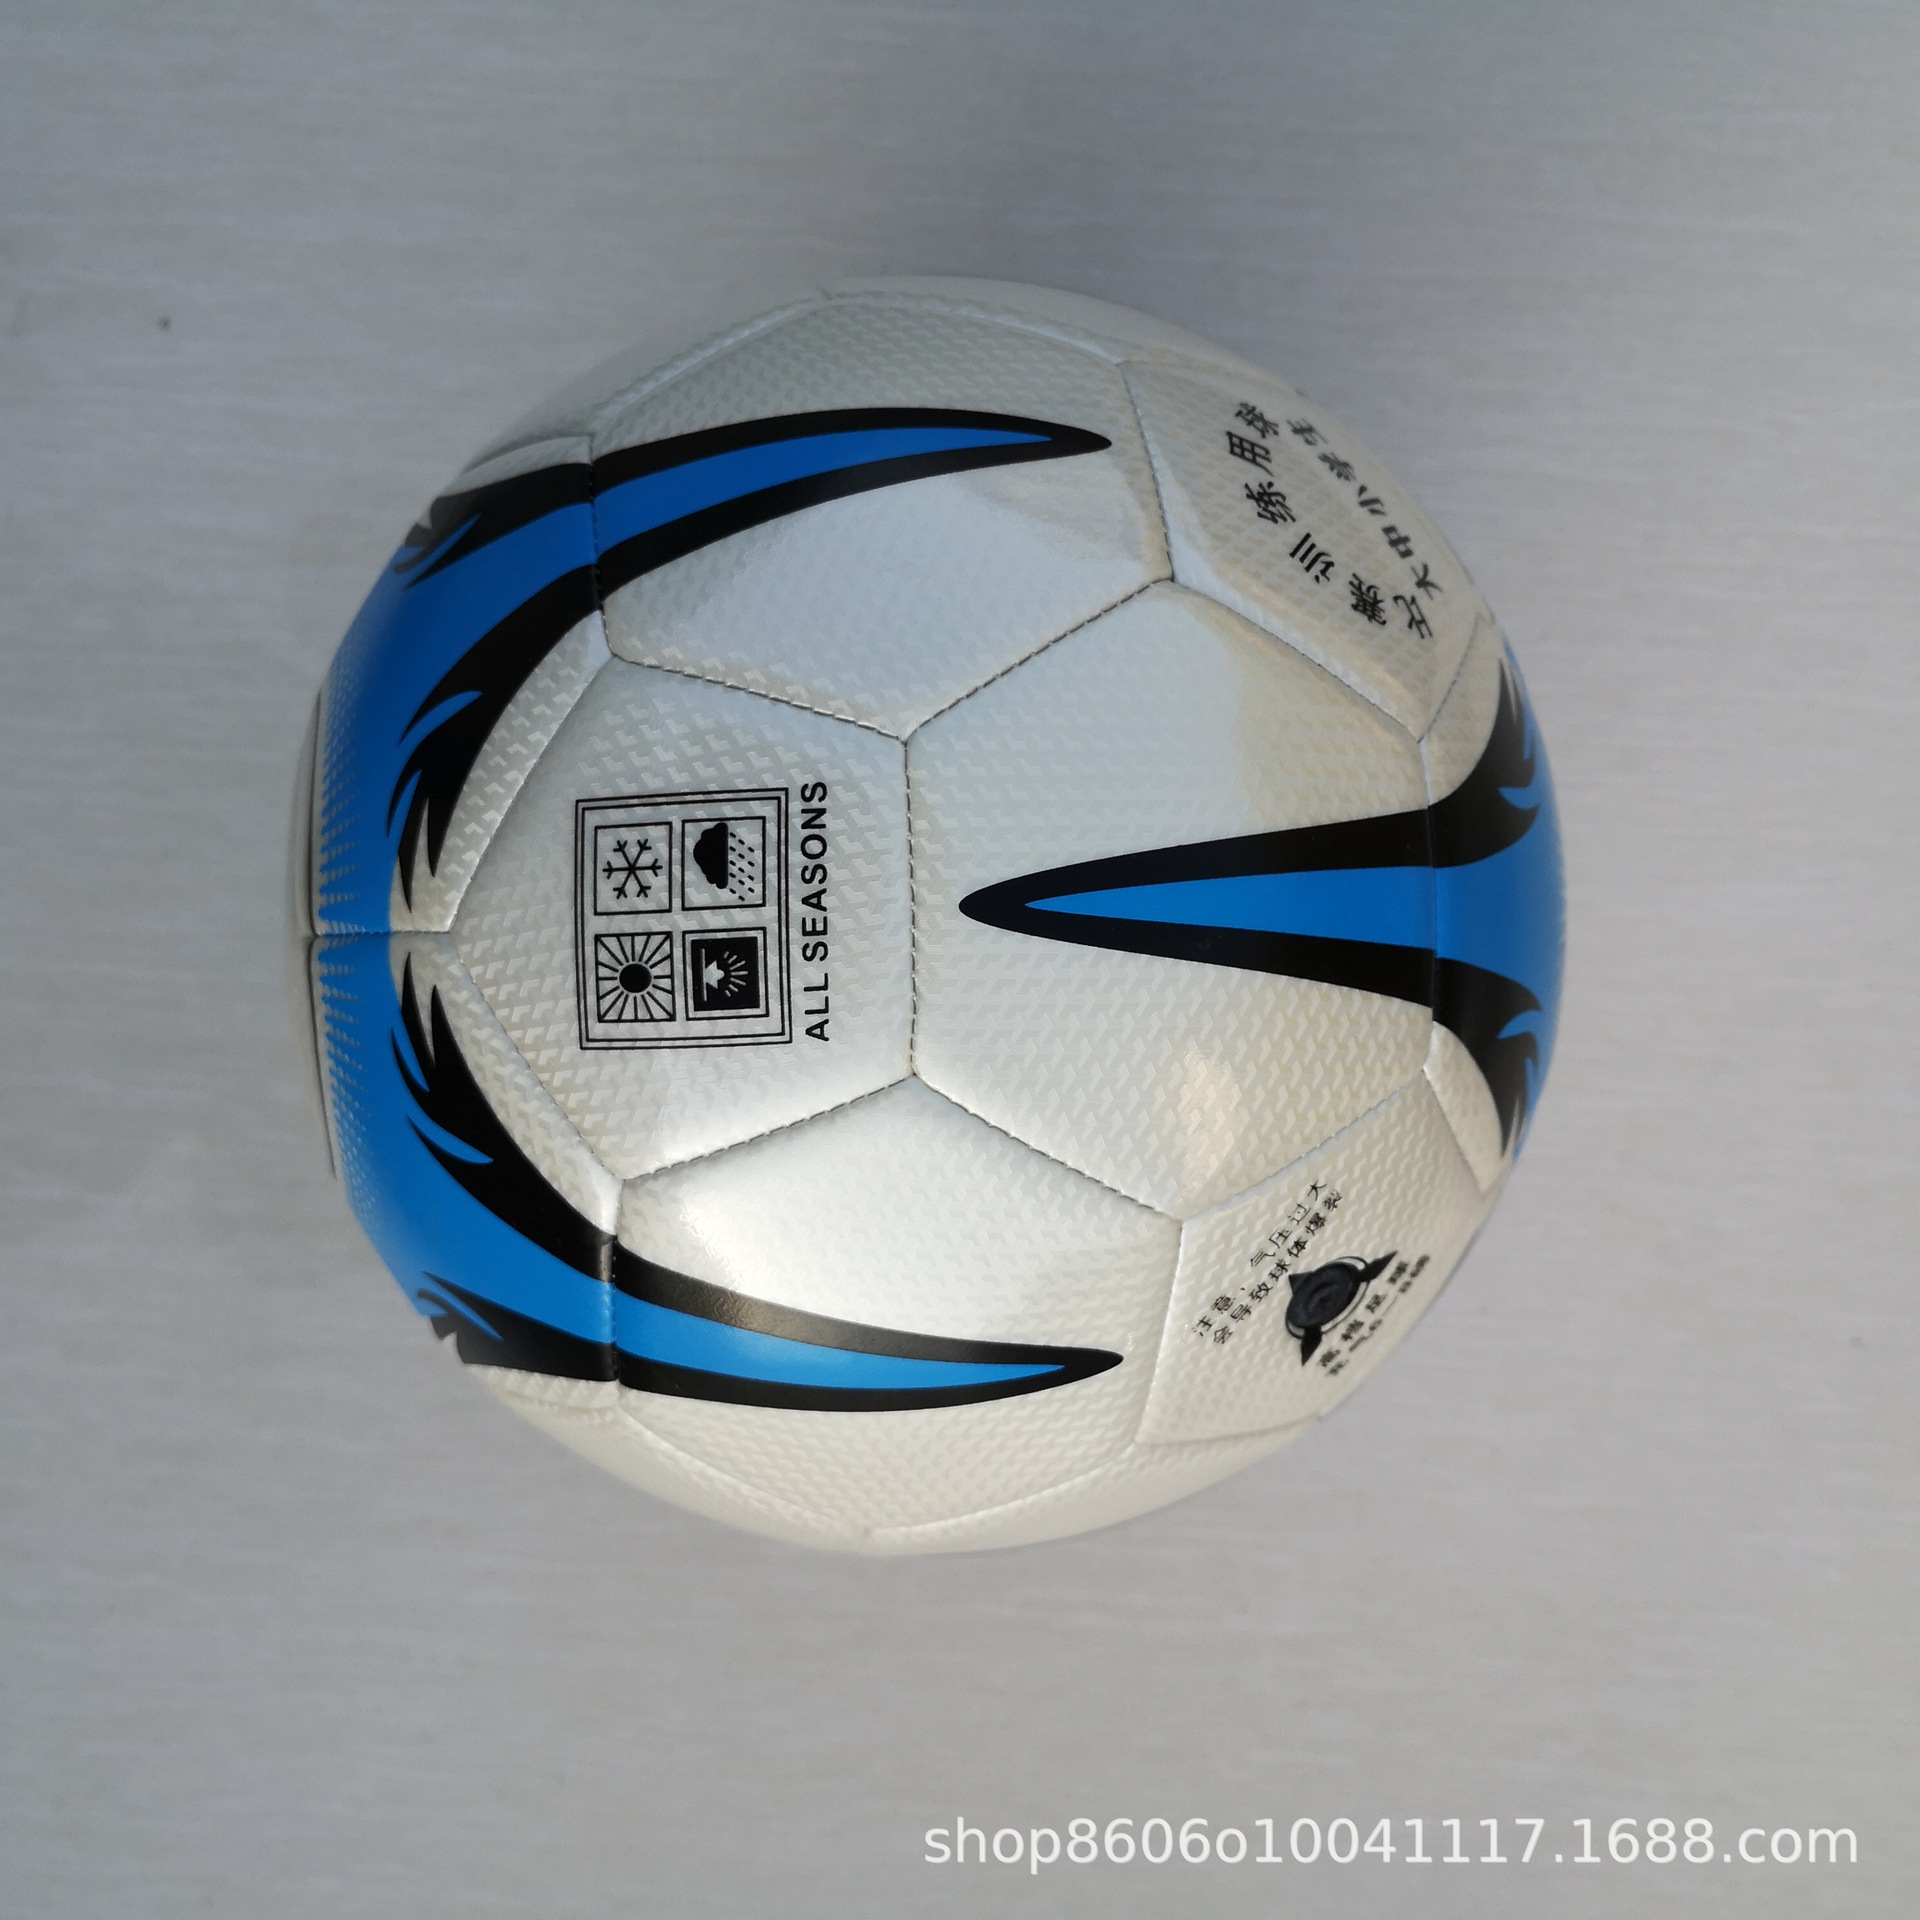 No. 5 TPU Thickened Embossed Football Youth Indoor and Outdoor Football Sports Training Competition Supplies Football